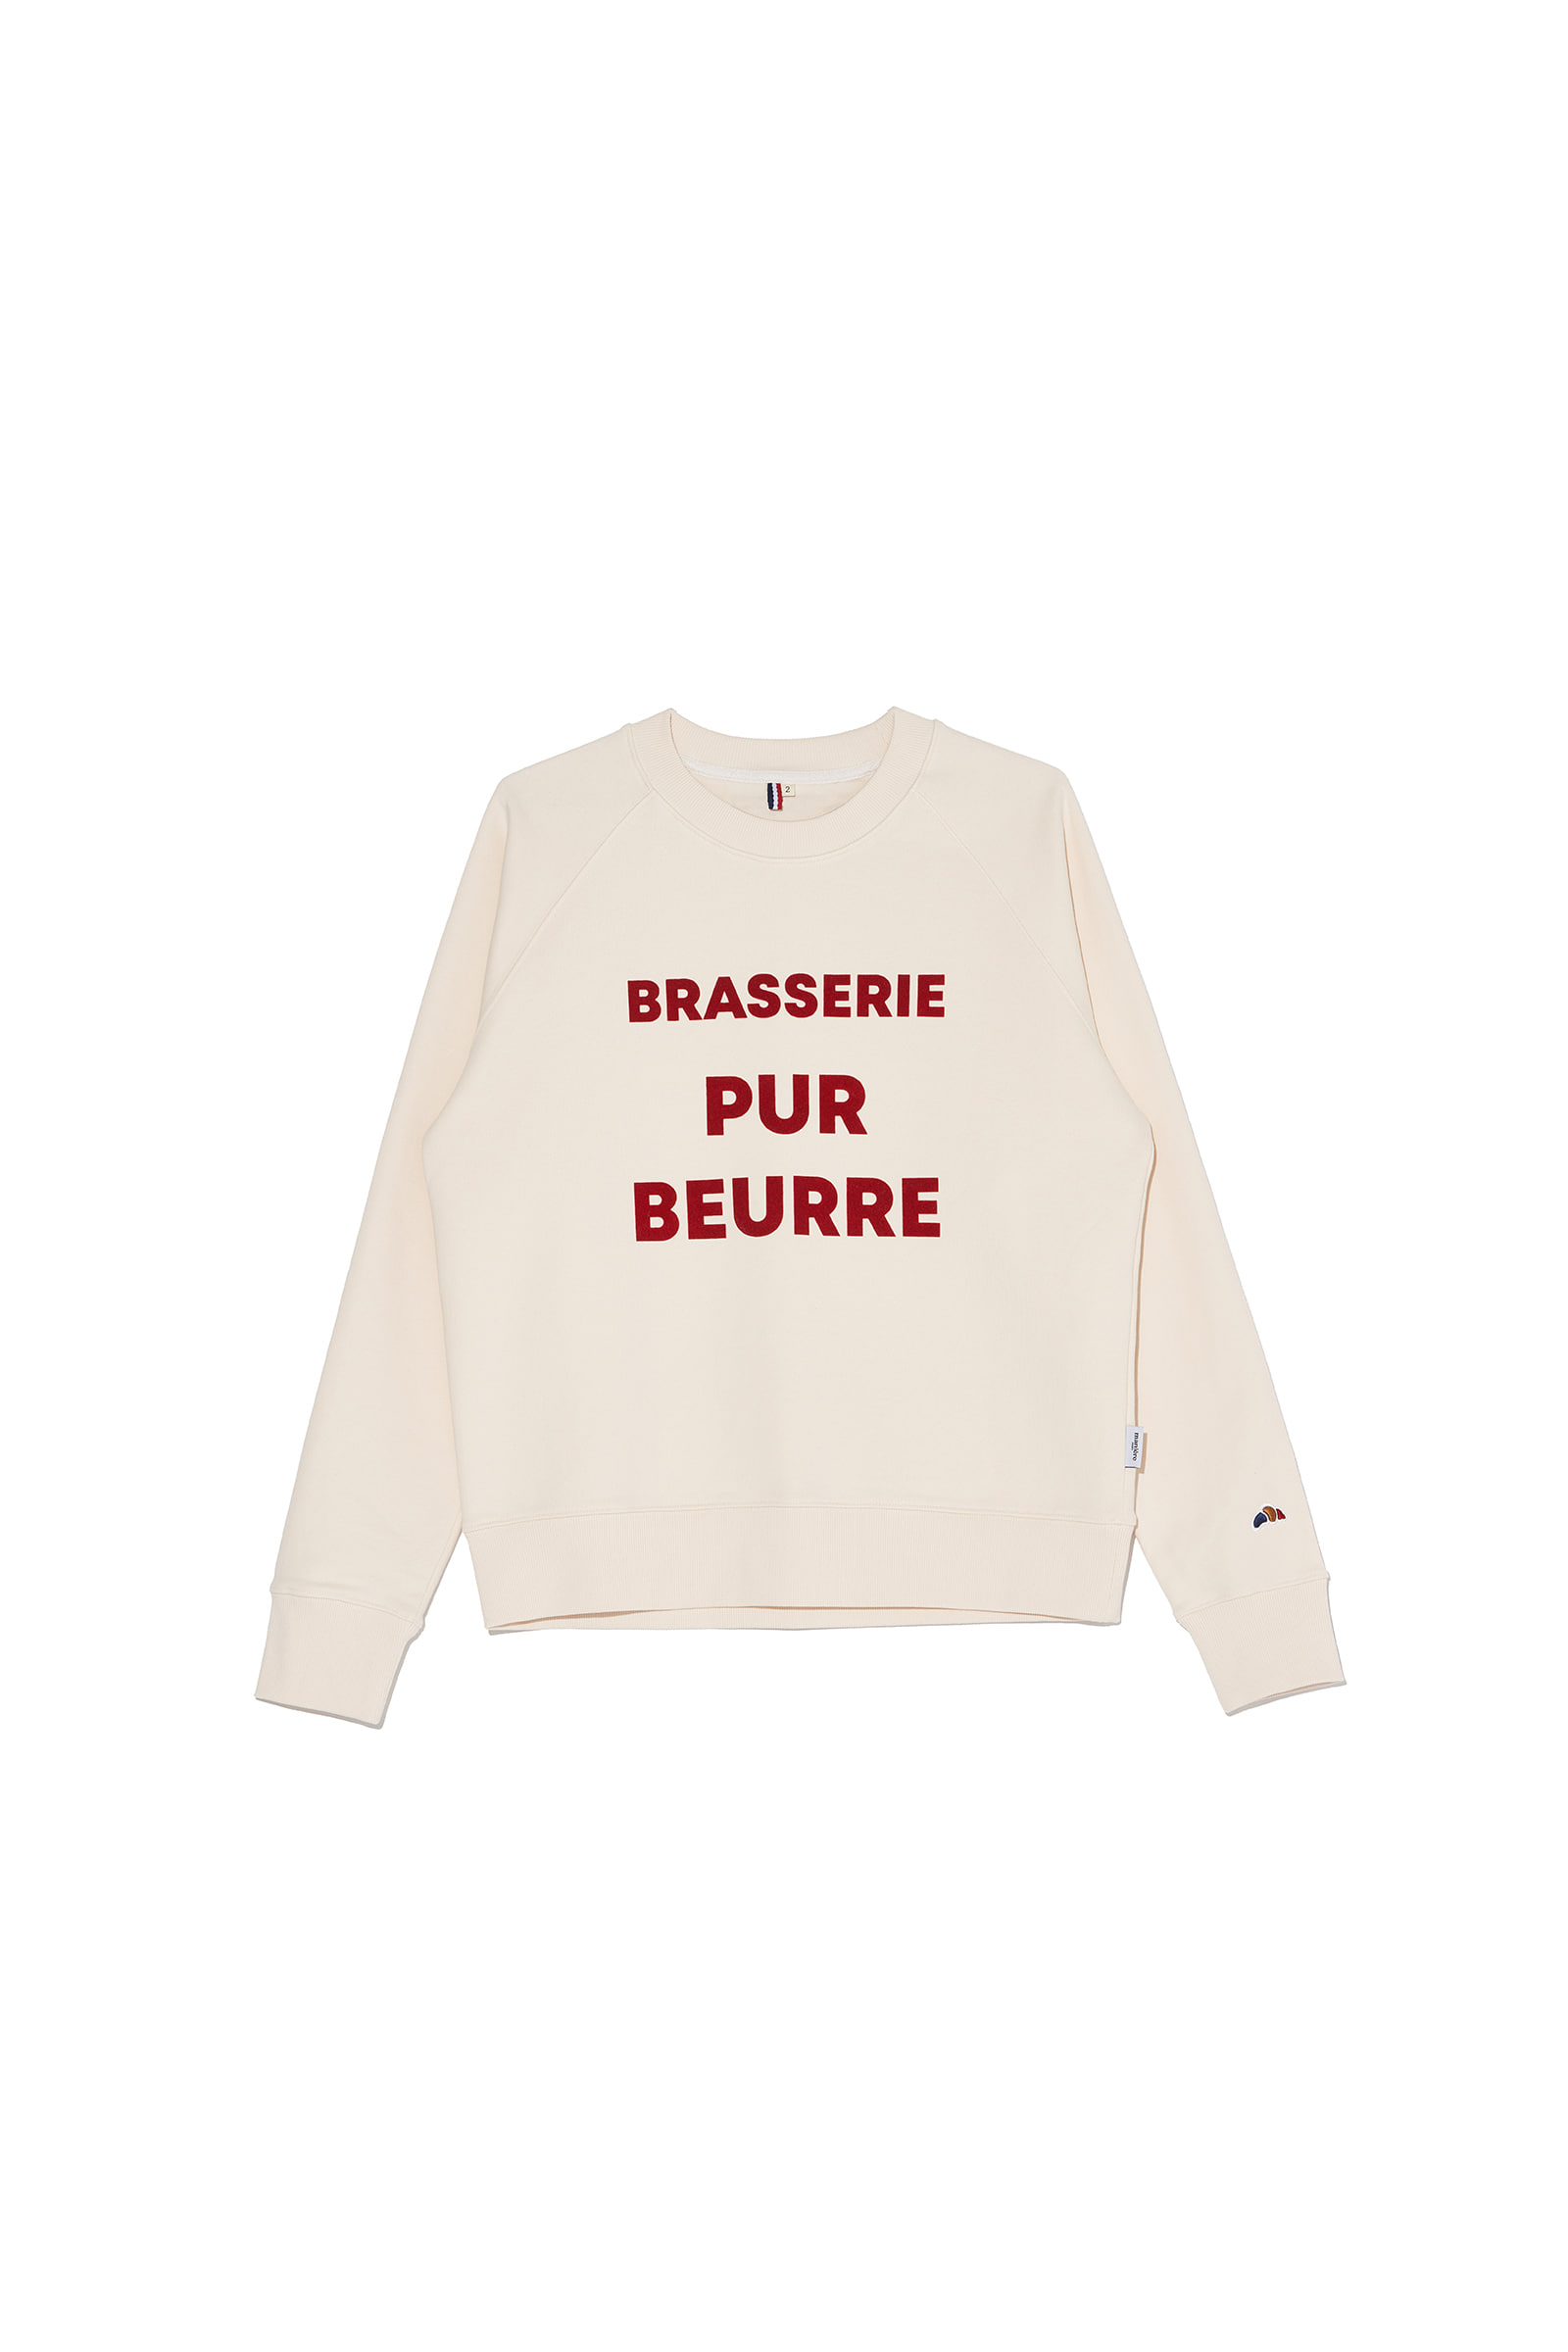 ep.6 BRASSERIE PUR BEURRE lettering sweatshirts (Ivory)